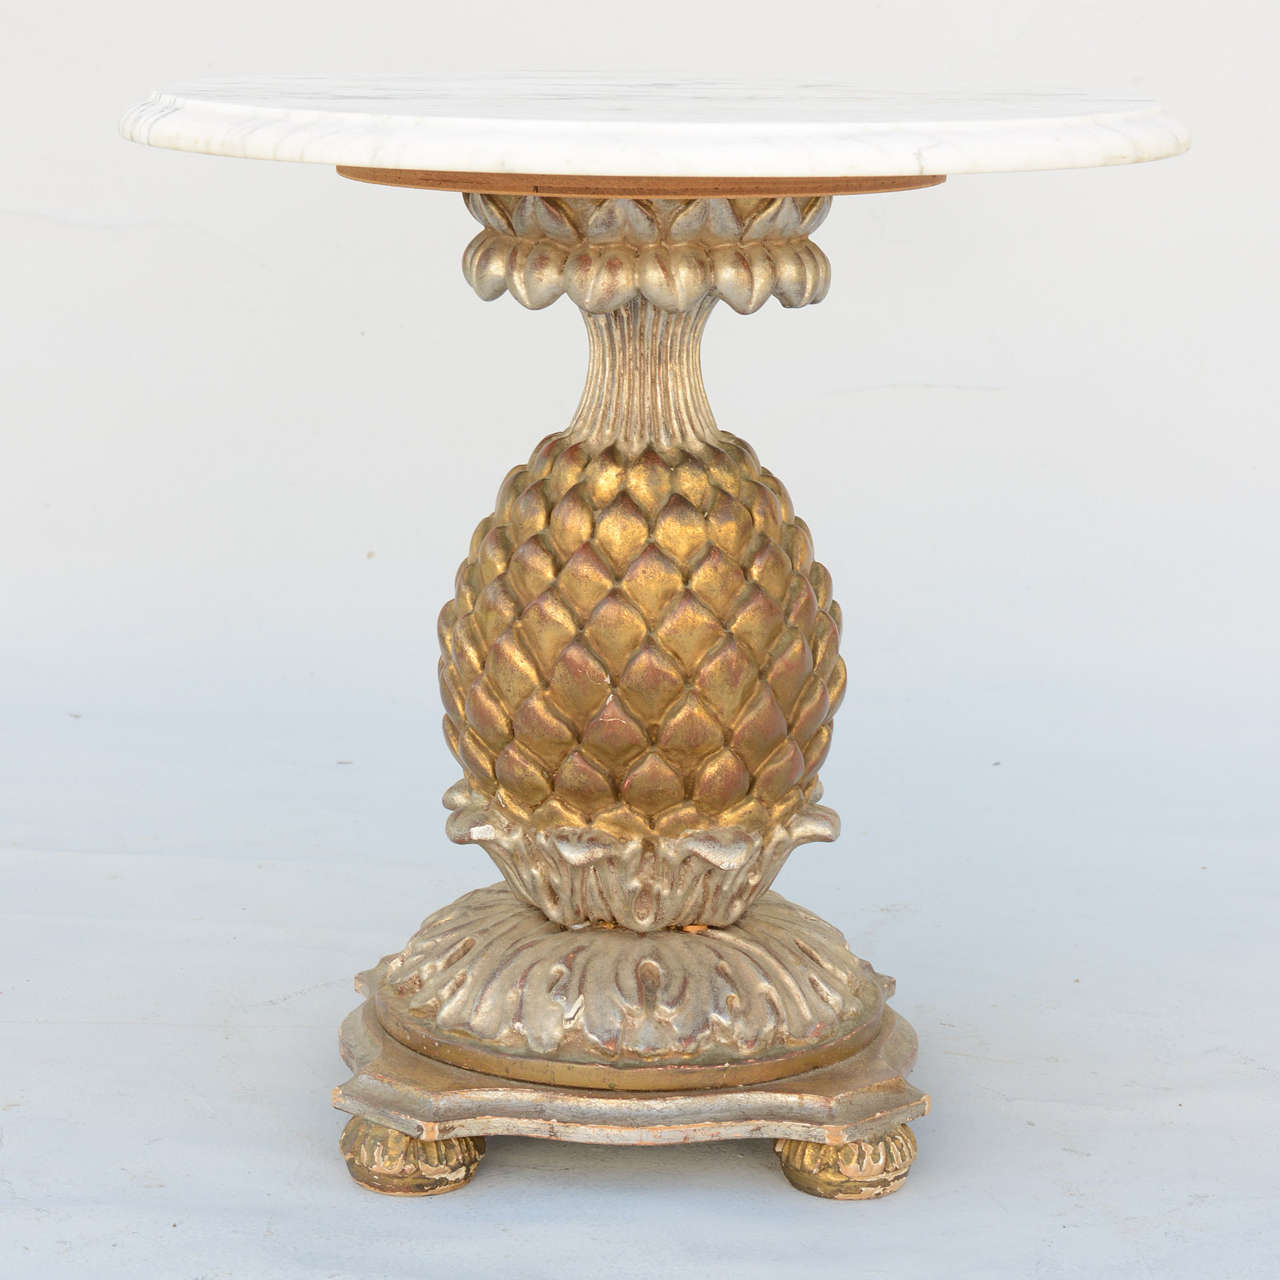 20th Century Italian Pineapple Form Accent Table